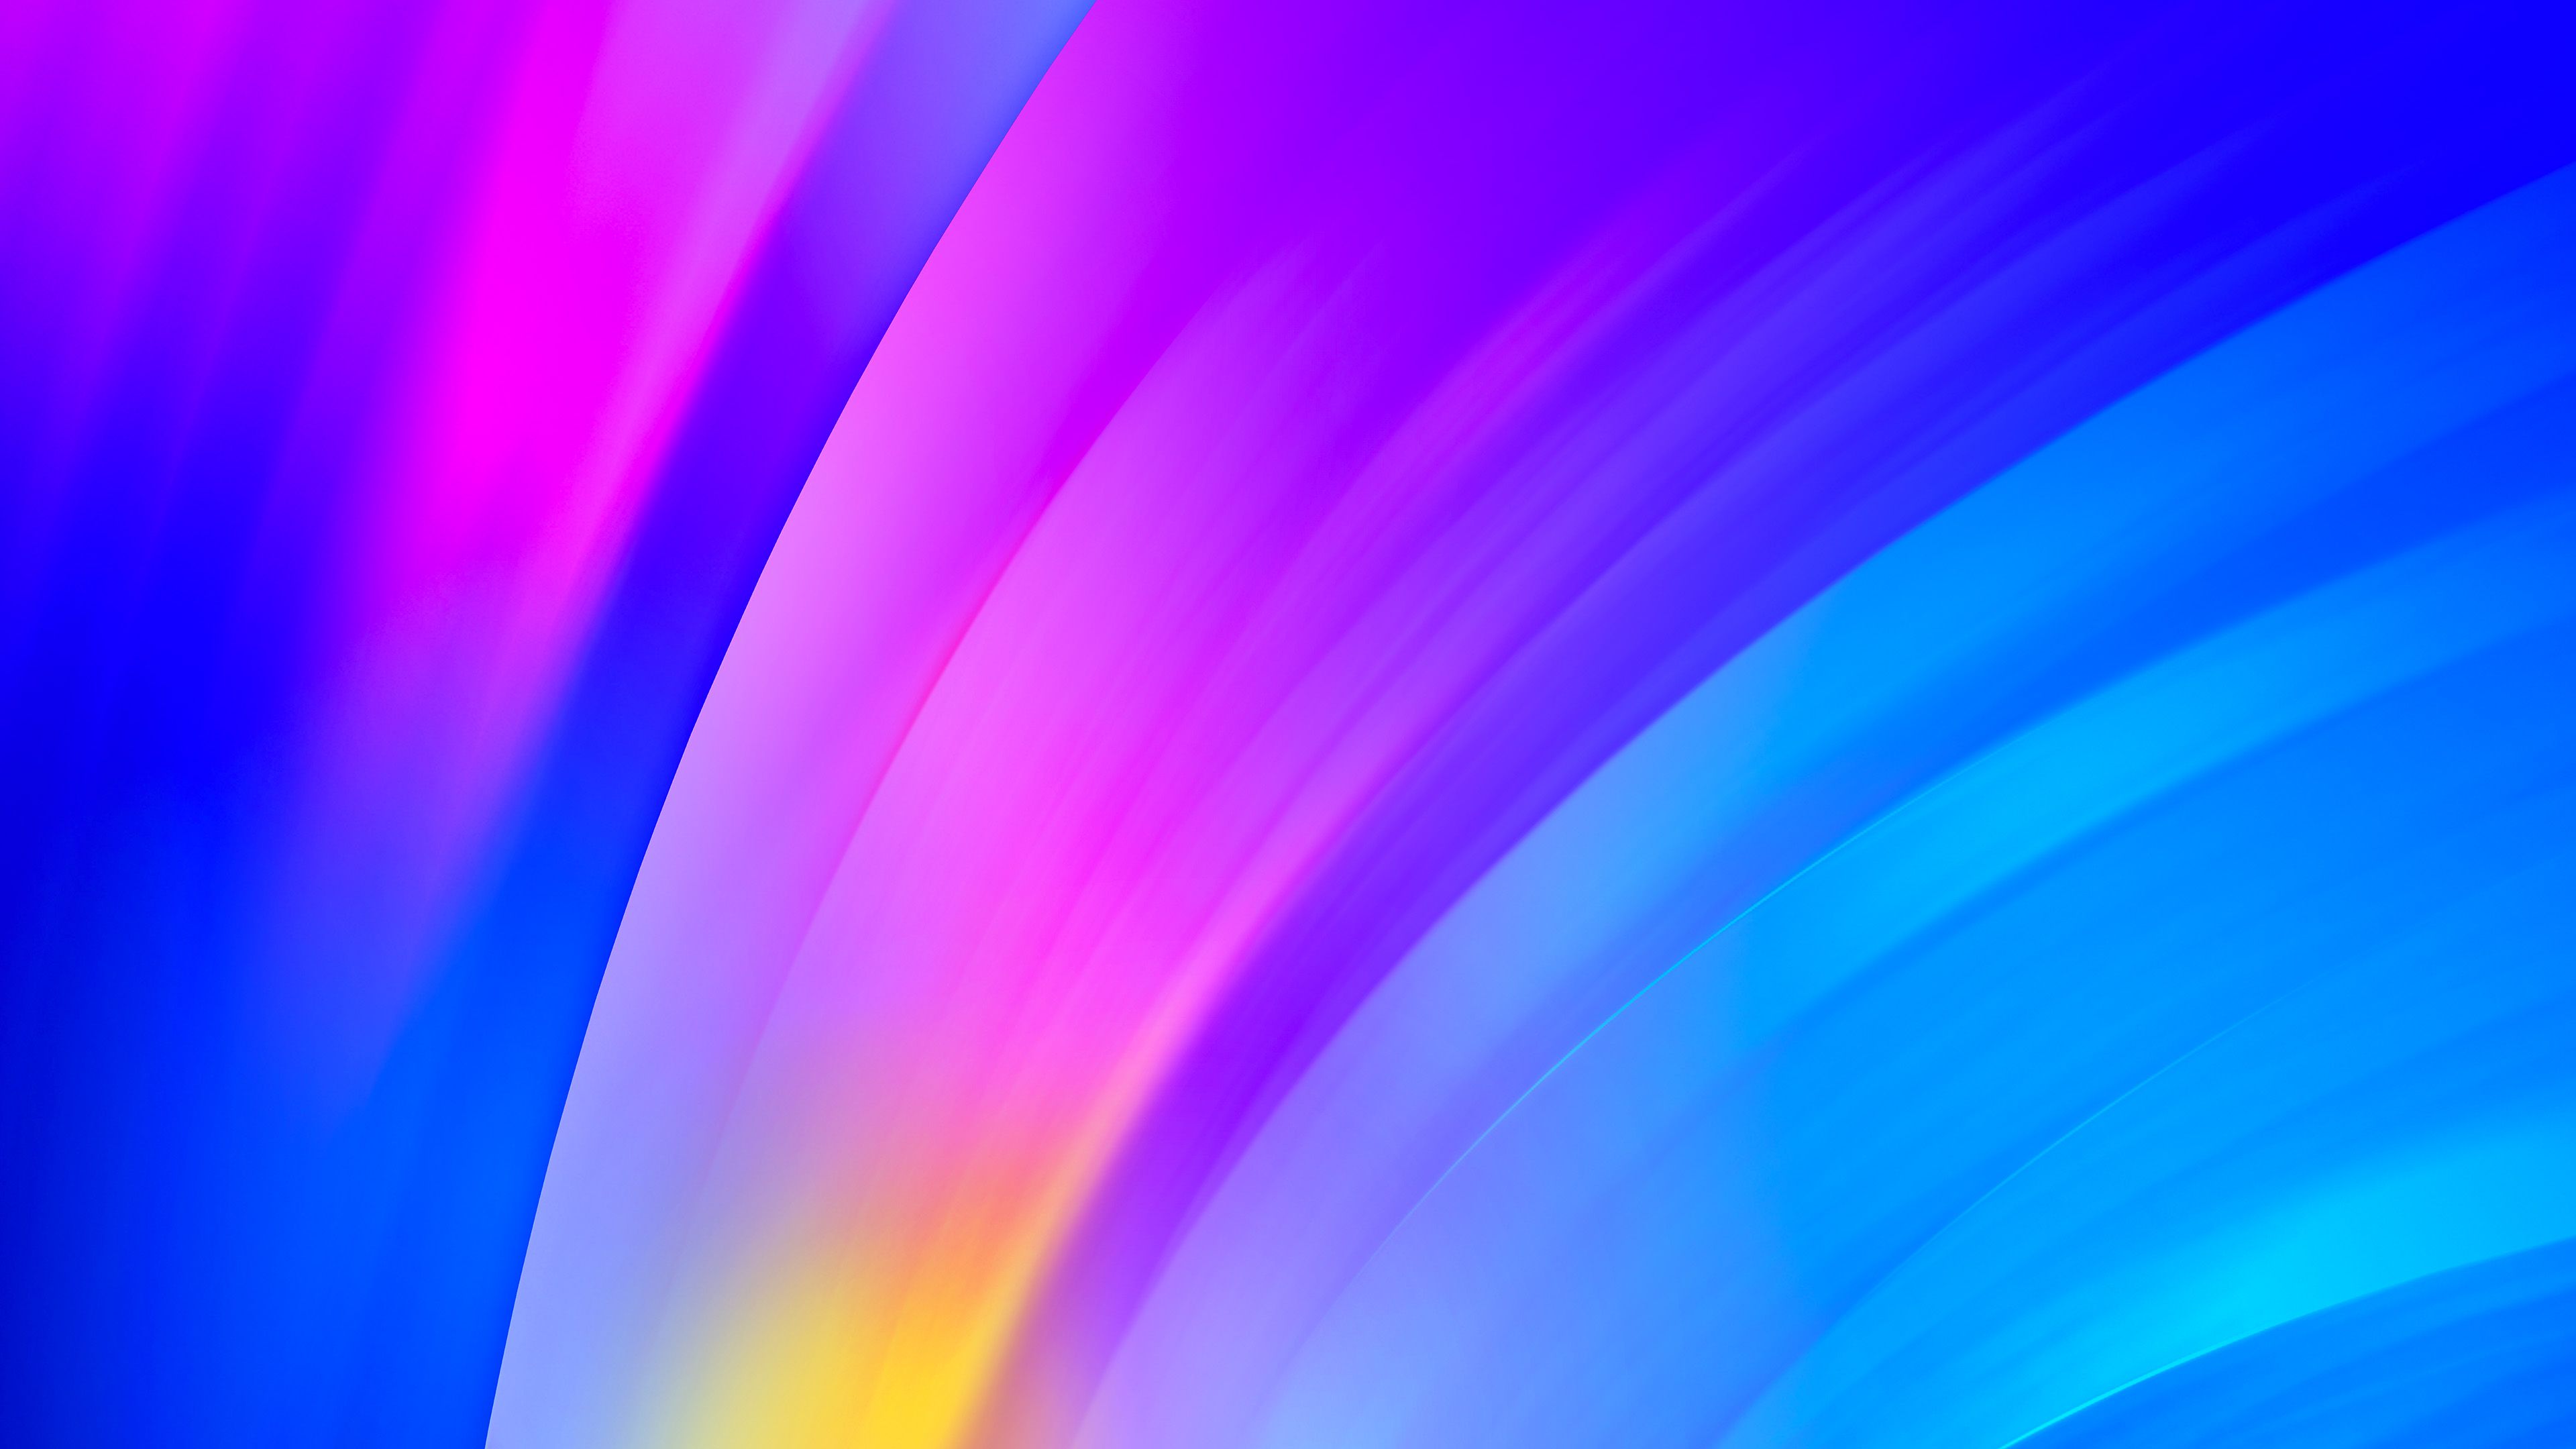 RedmiBook Colorful Gradient Abstract Wallpaper